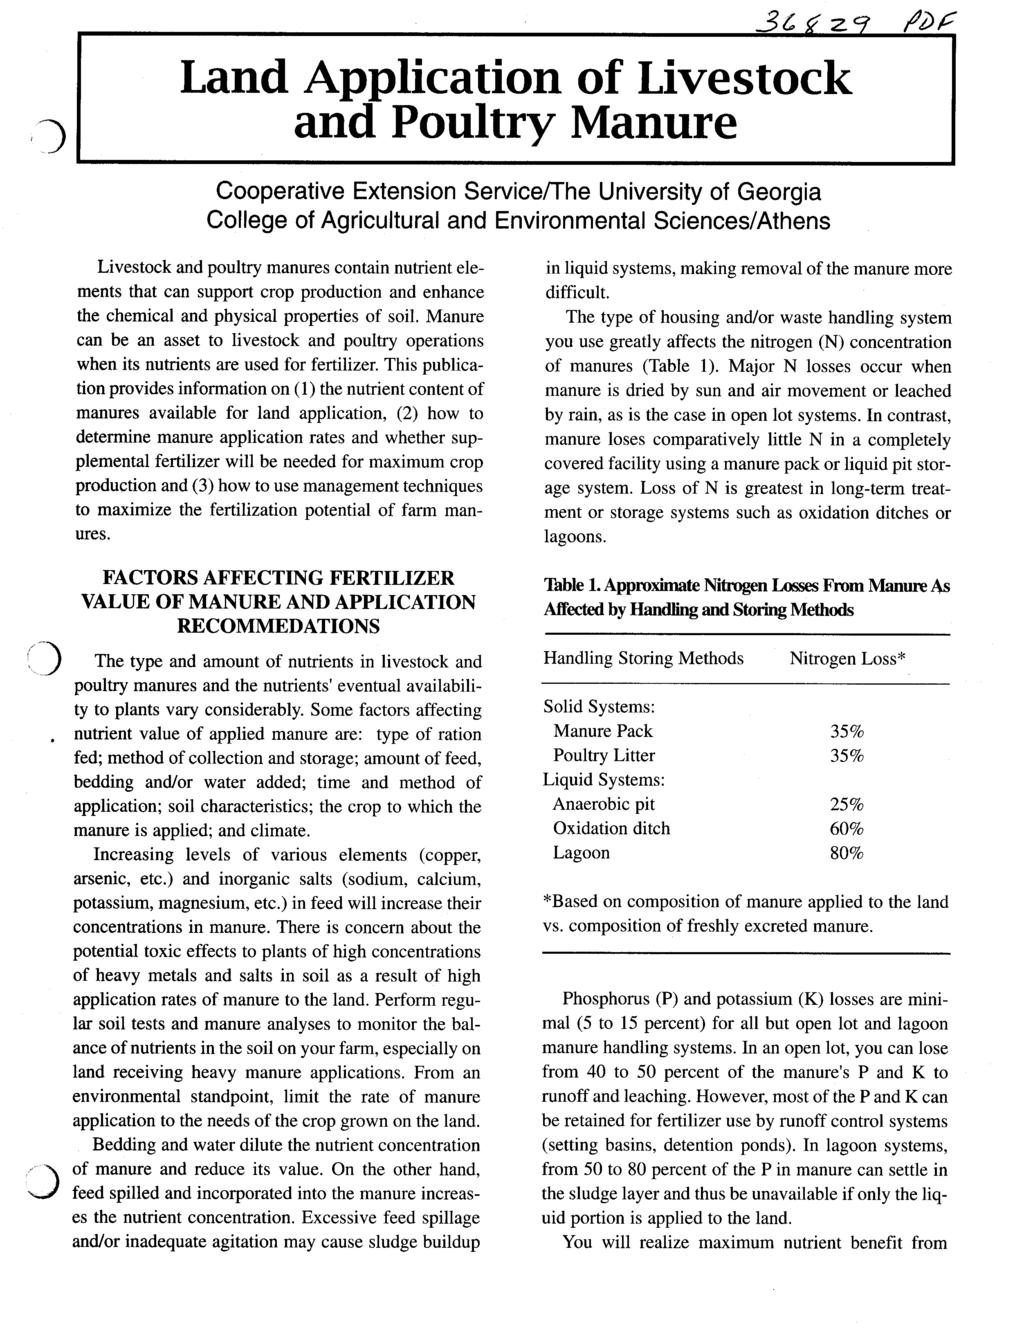 Land Application of Livestock and Poultry Manure Cooperative Extension Servicenhe University of Georgia College of Agricultural and Environmental SciencedAthens Livestock and poultry manures contain